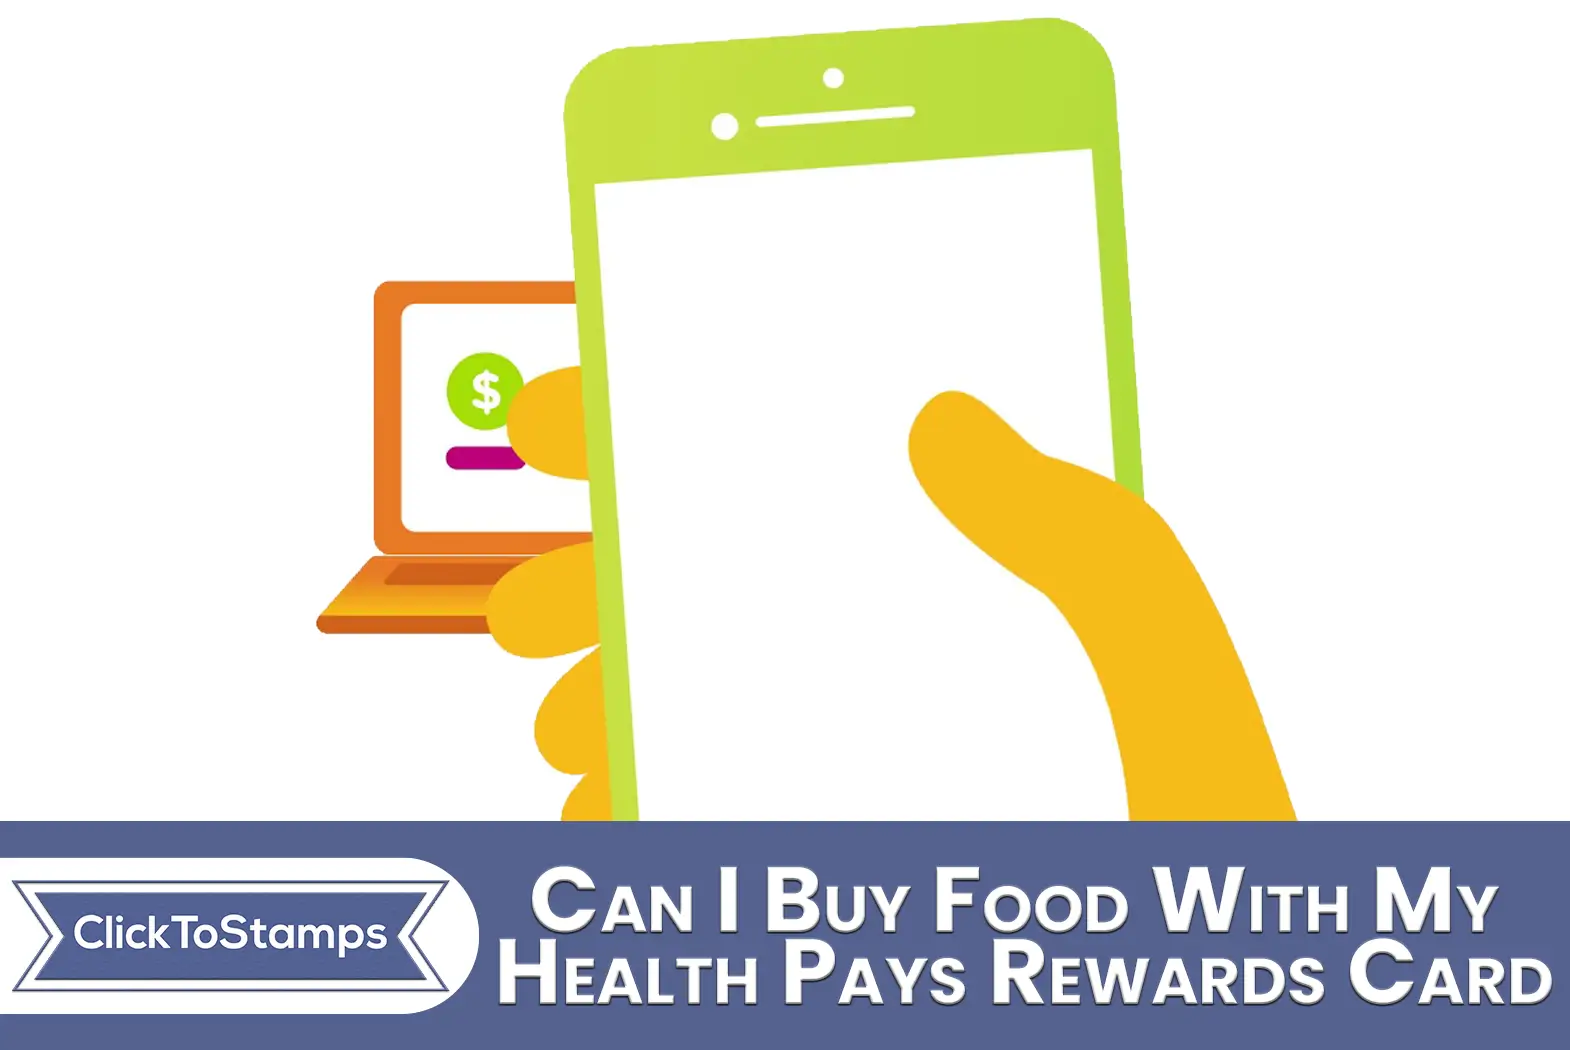 Can I Buy Food With My Health Pays Rewards Card